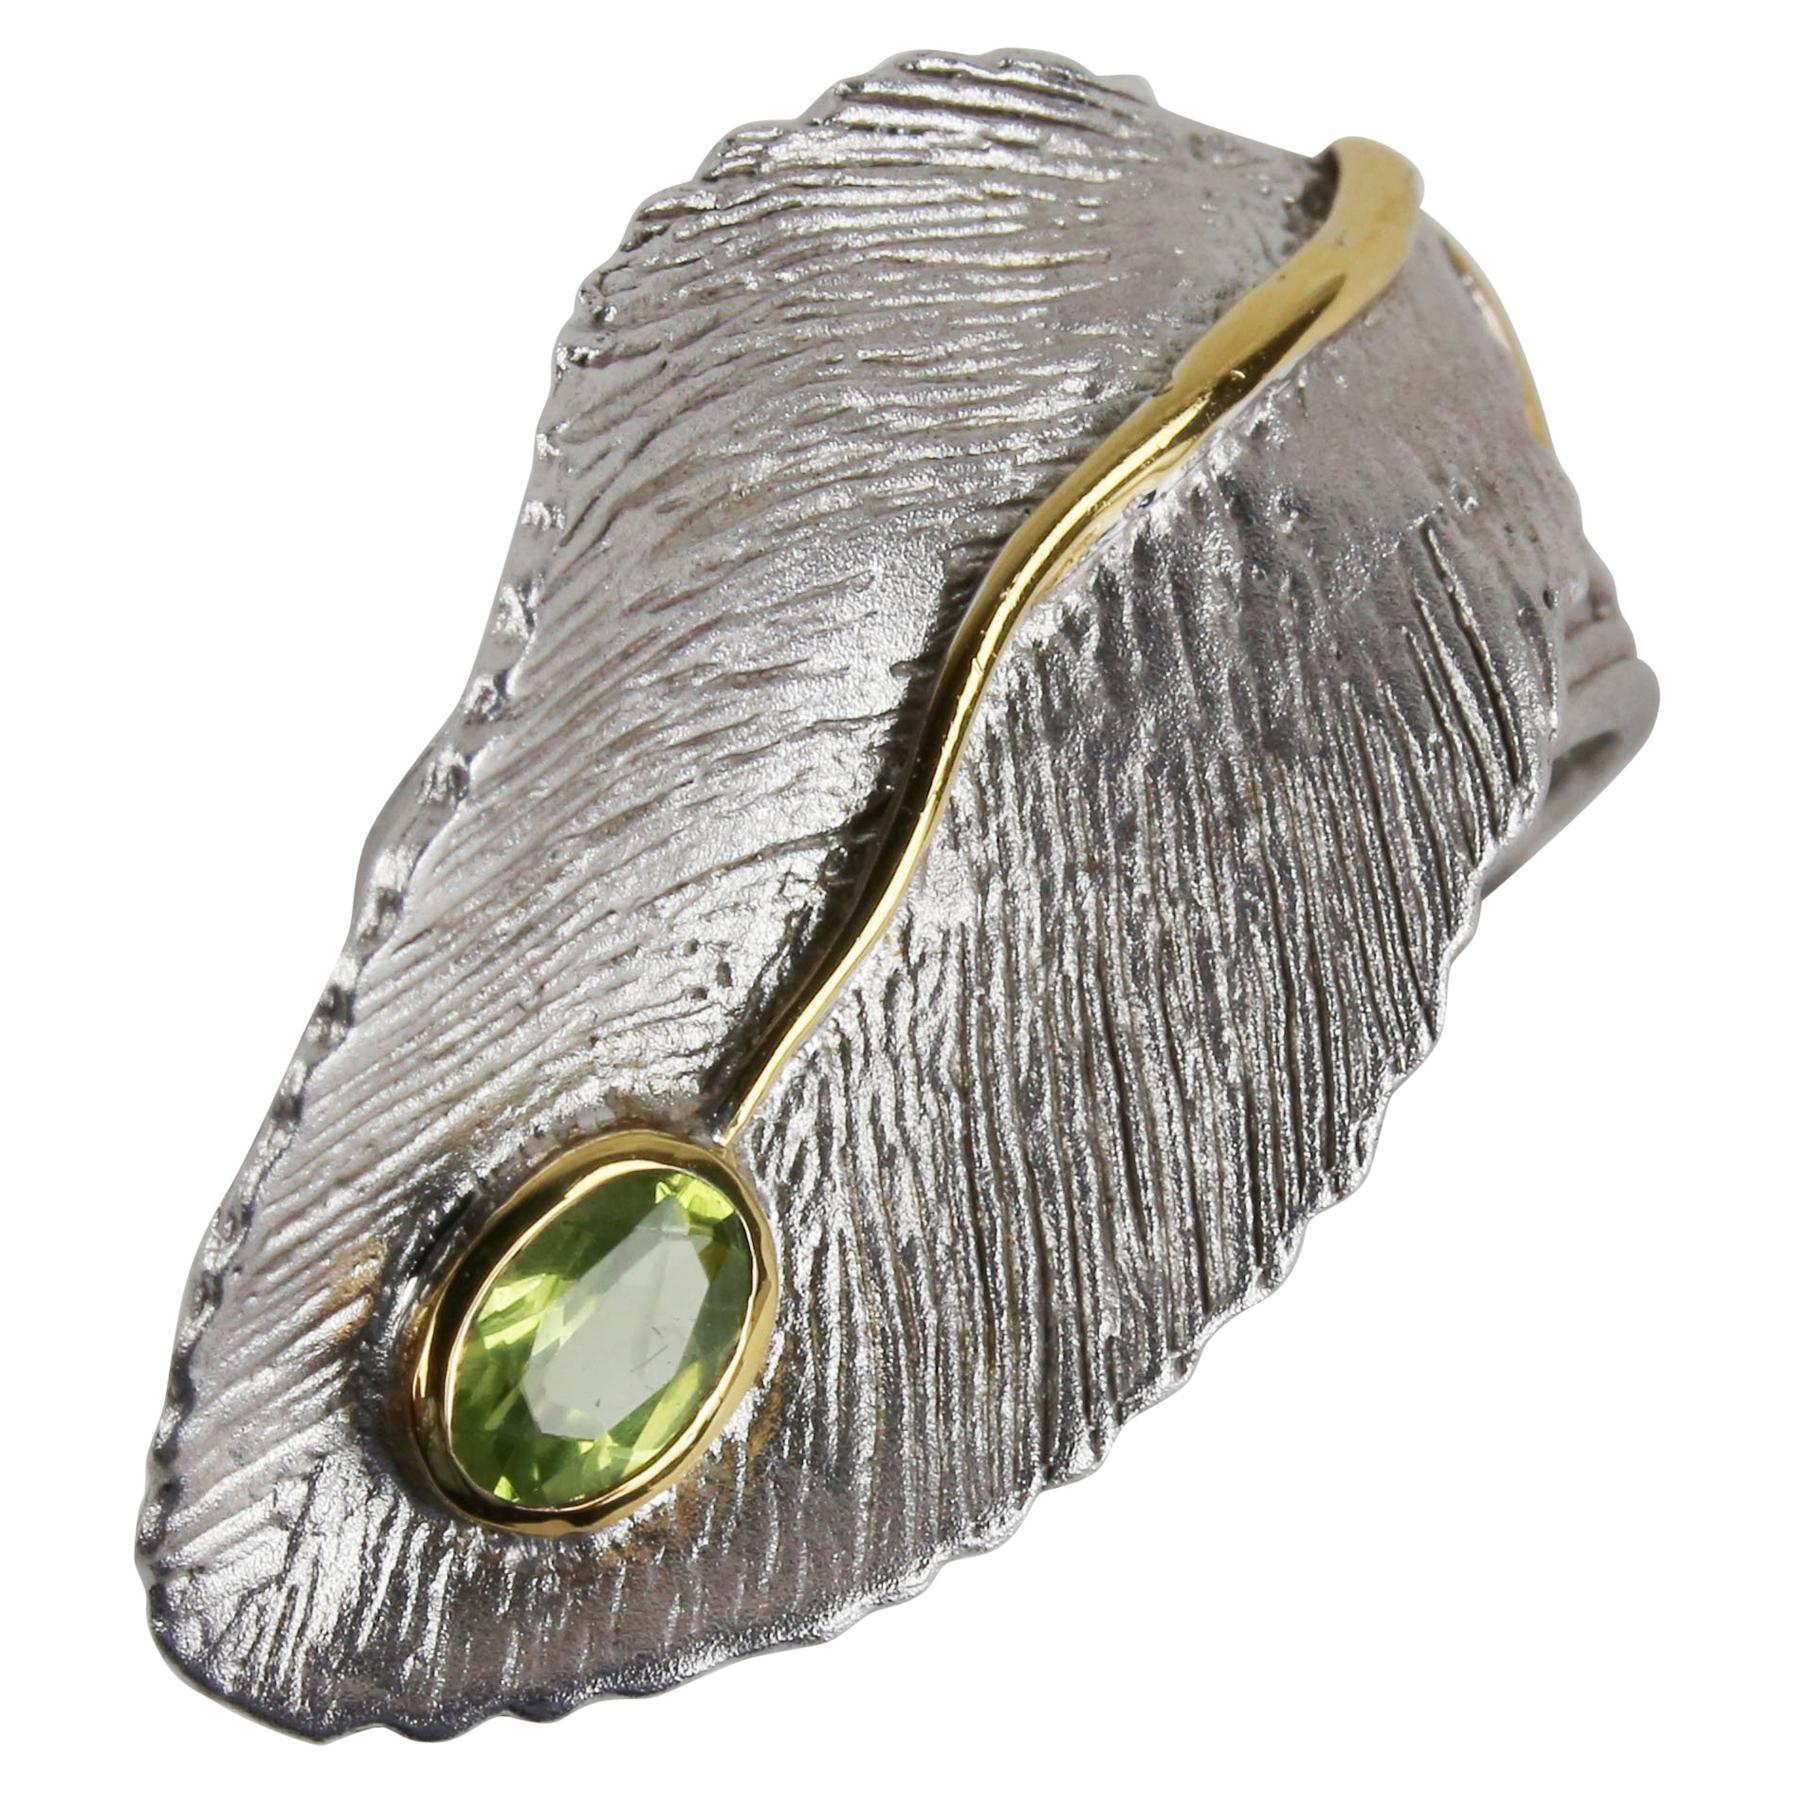 Vintage Peridot Leaf Ring 14K Gold Accents Sterling Silver Estate Fine Jewelry For Sale